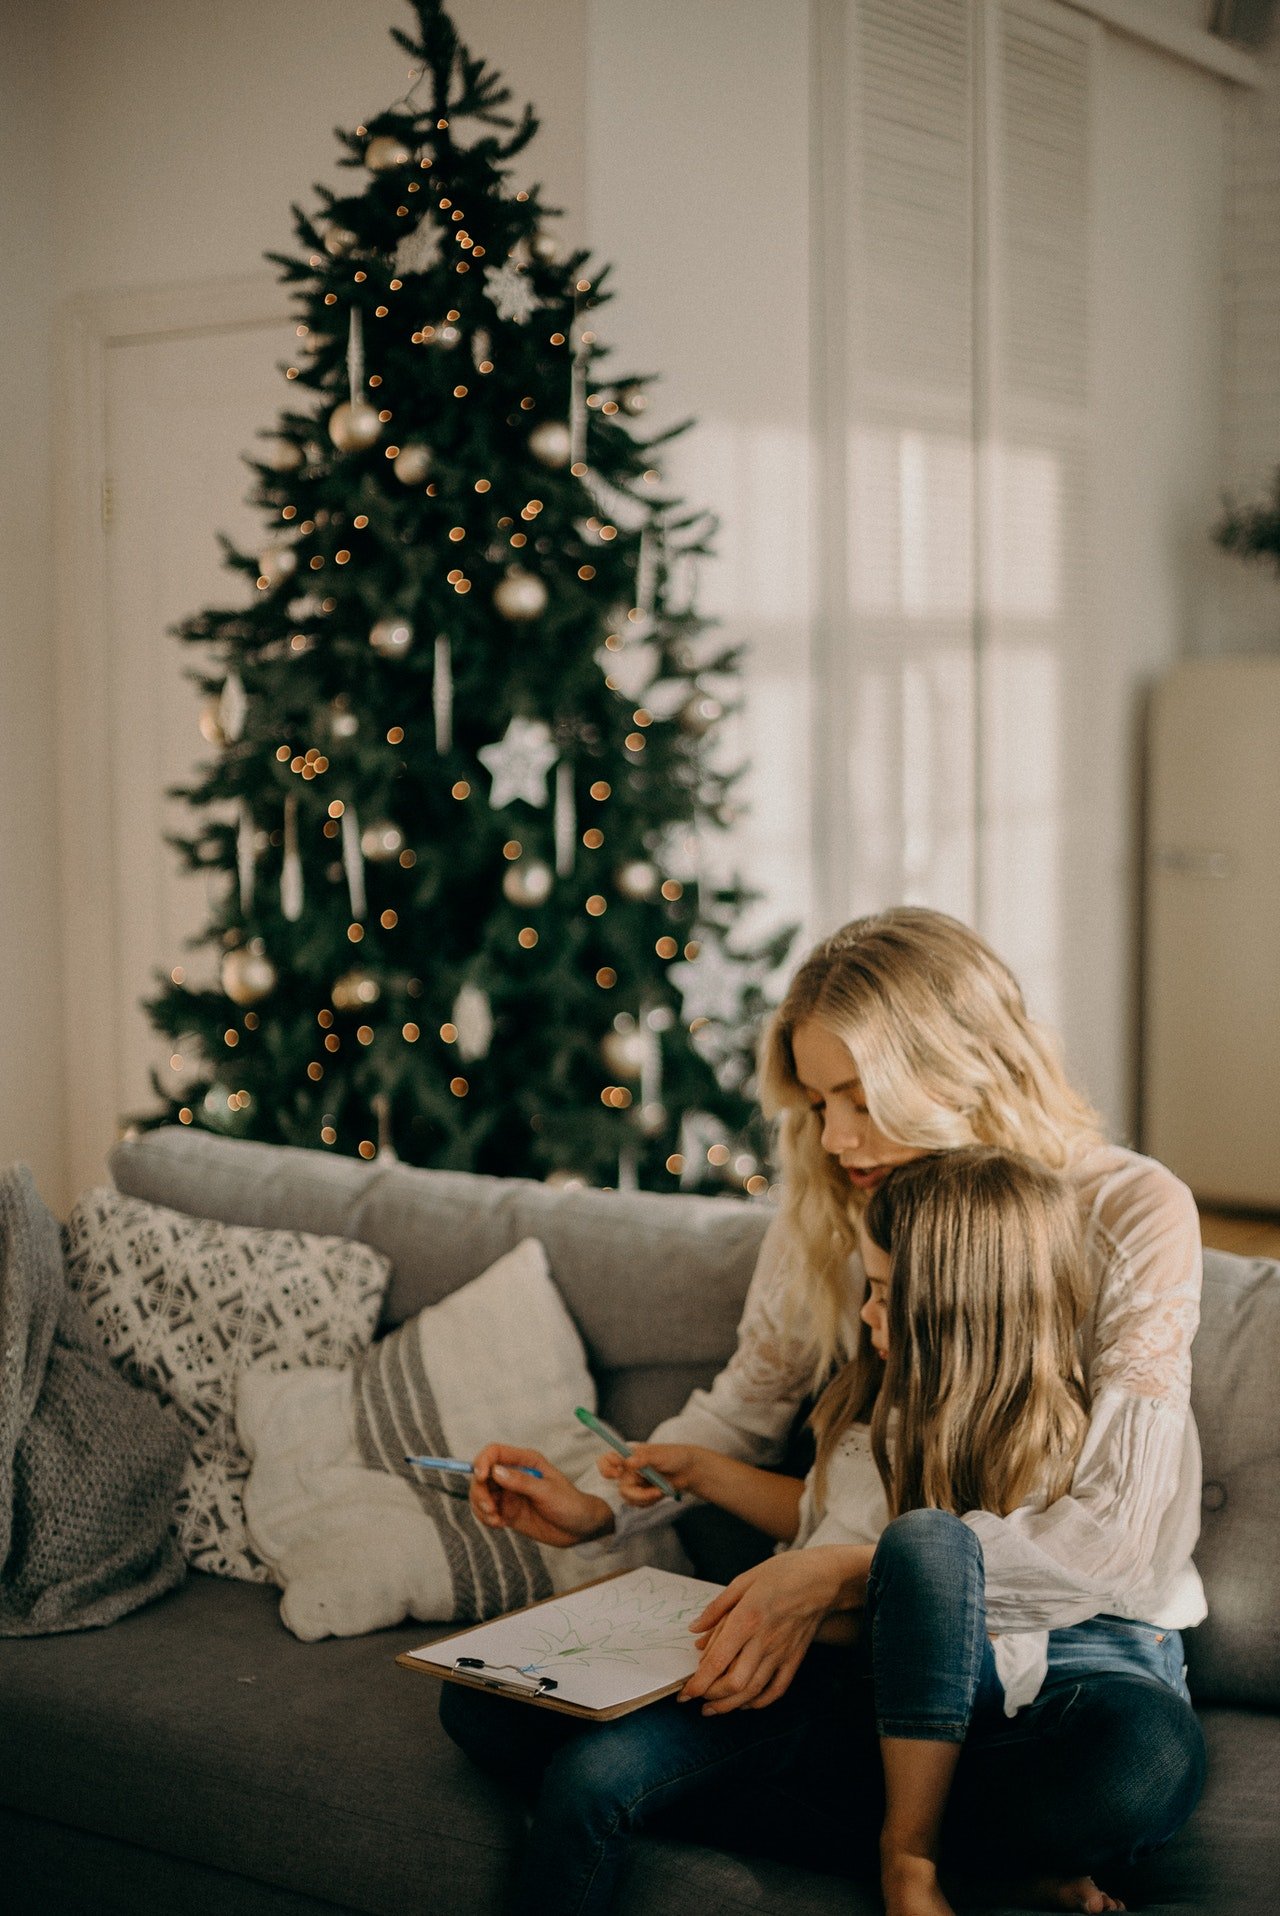 Woman and her daughter spending time together | Photo: Pexels